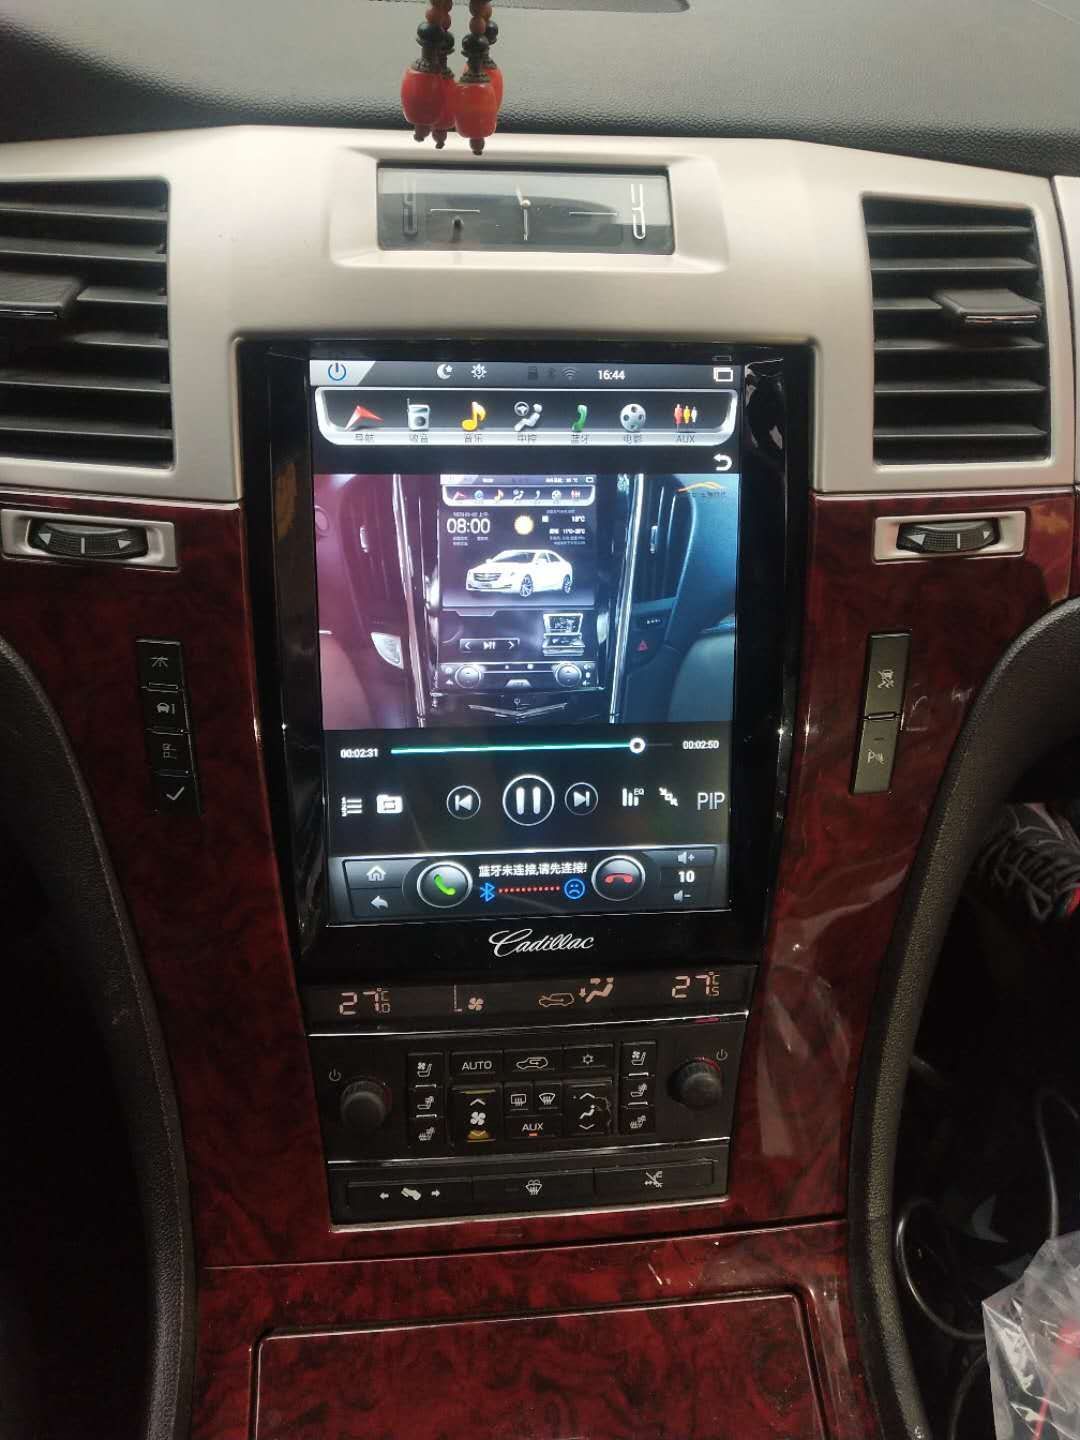 [Open-box] [PX6 SIX-CORE] 10.4" ANDROID 9.0 Fast Boot VERTICAL SCREEN Navigation Radio for Cadillac Escalade 2007 - 2014-Phoenix Automotive